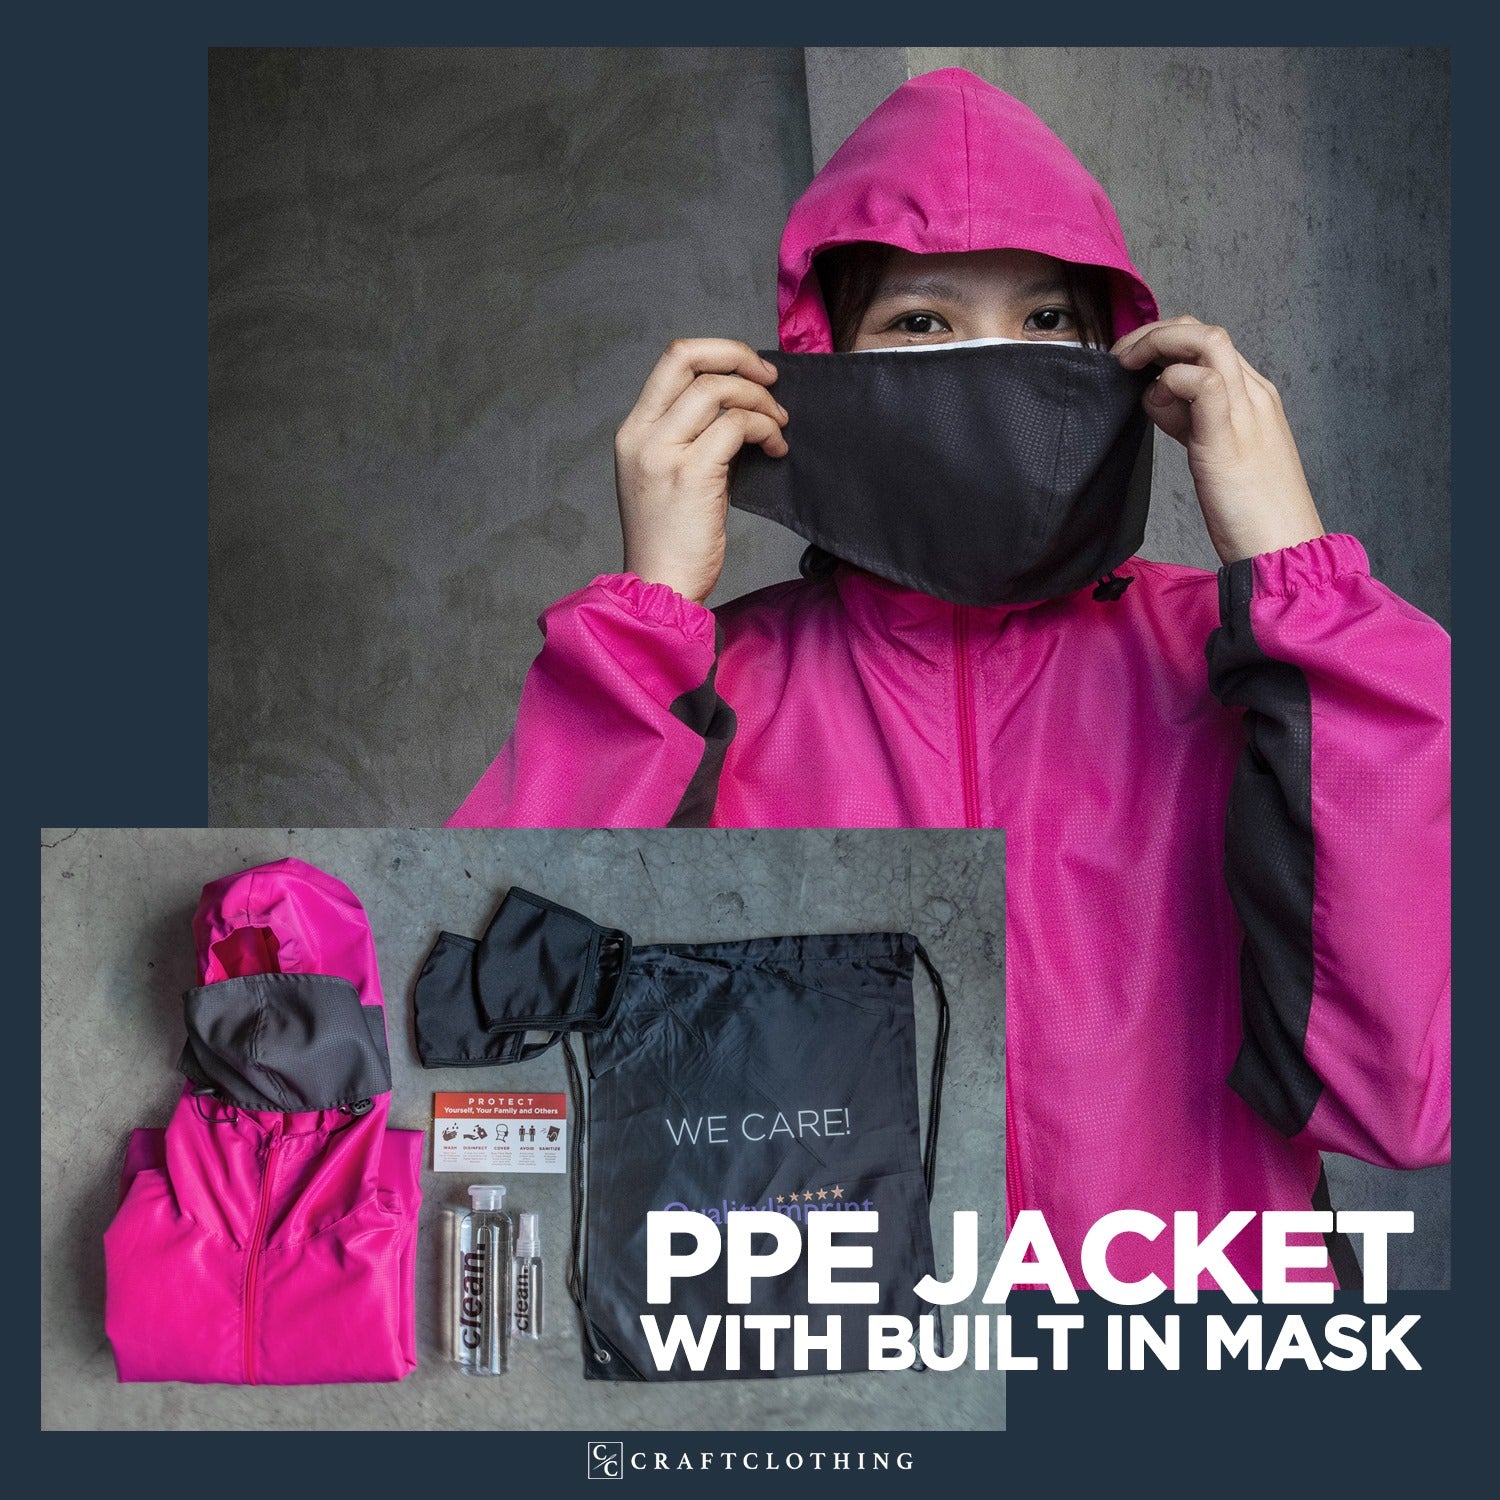 PPE JACKET WITH BUILT IN MASK